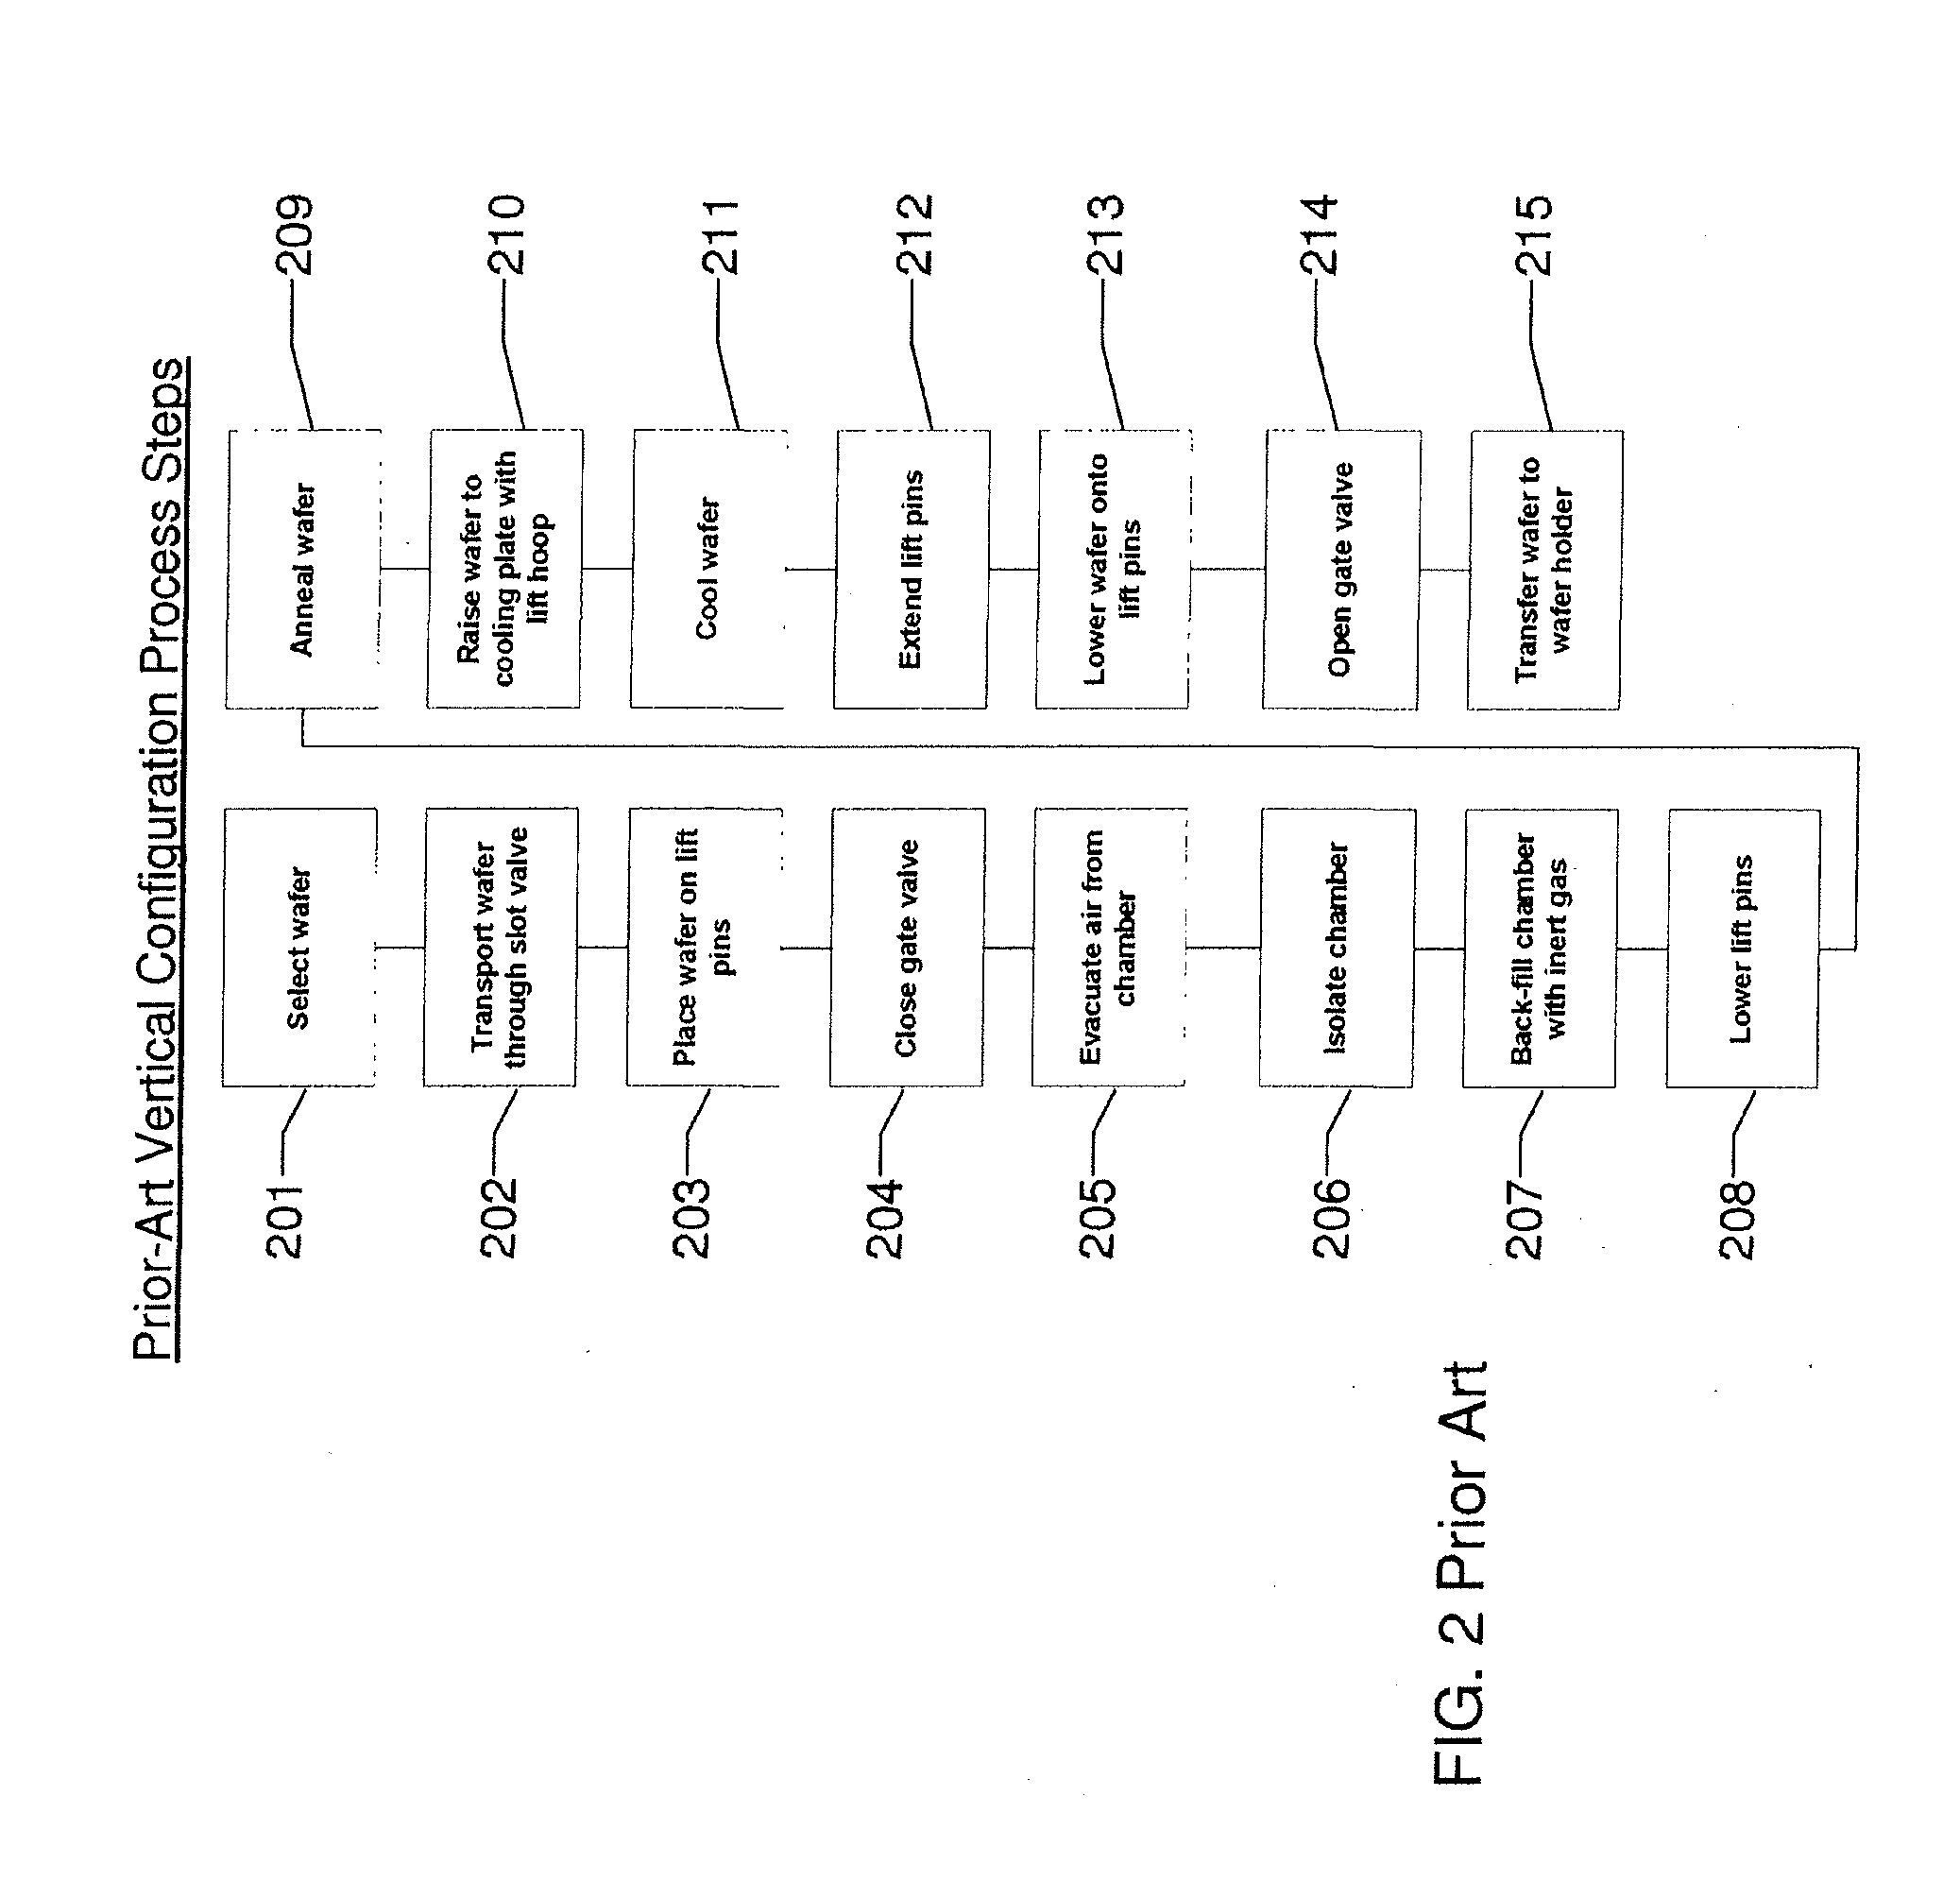 Apparatus for thermal processing with micro-environment